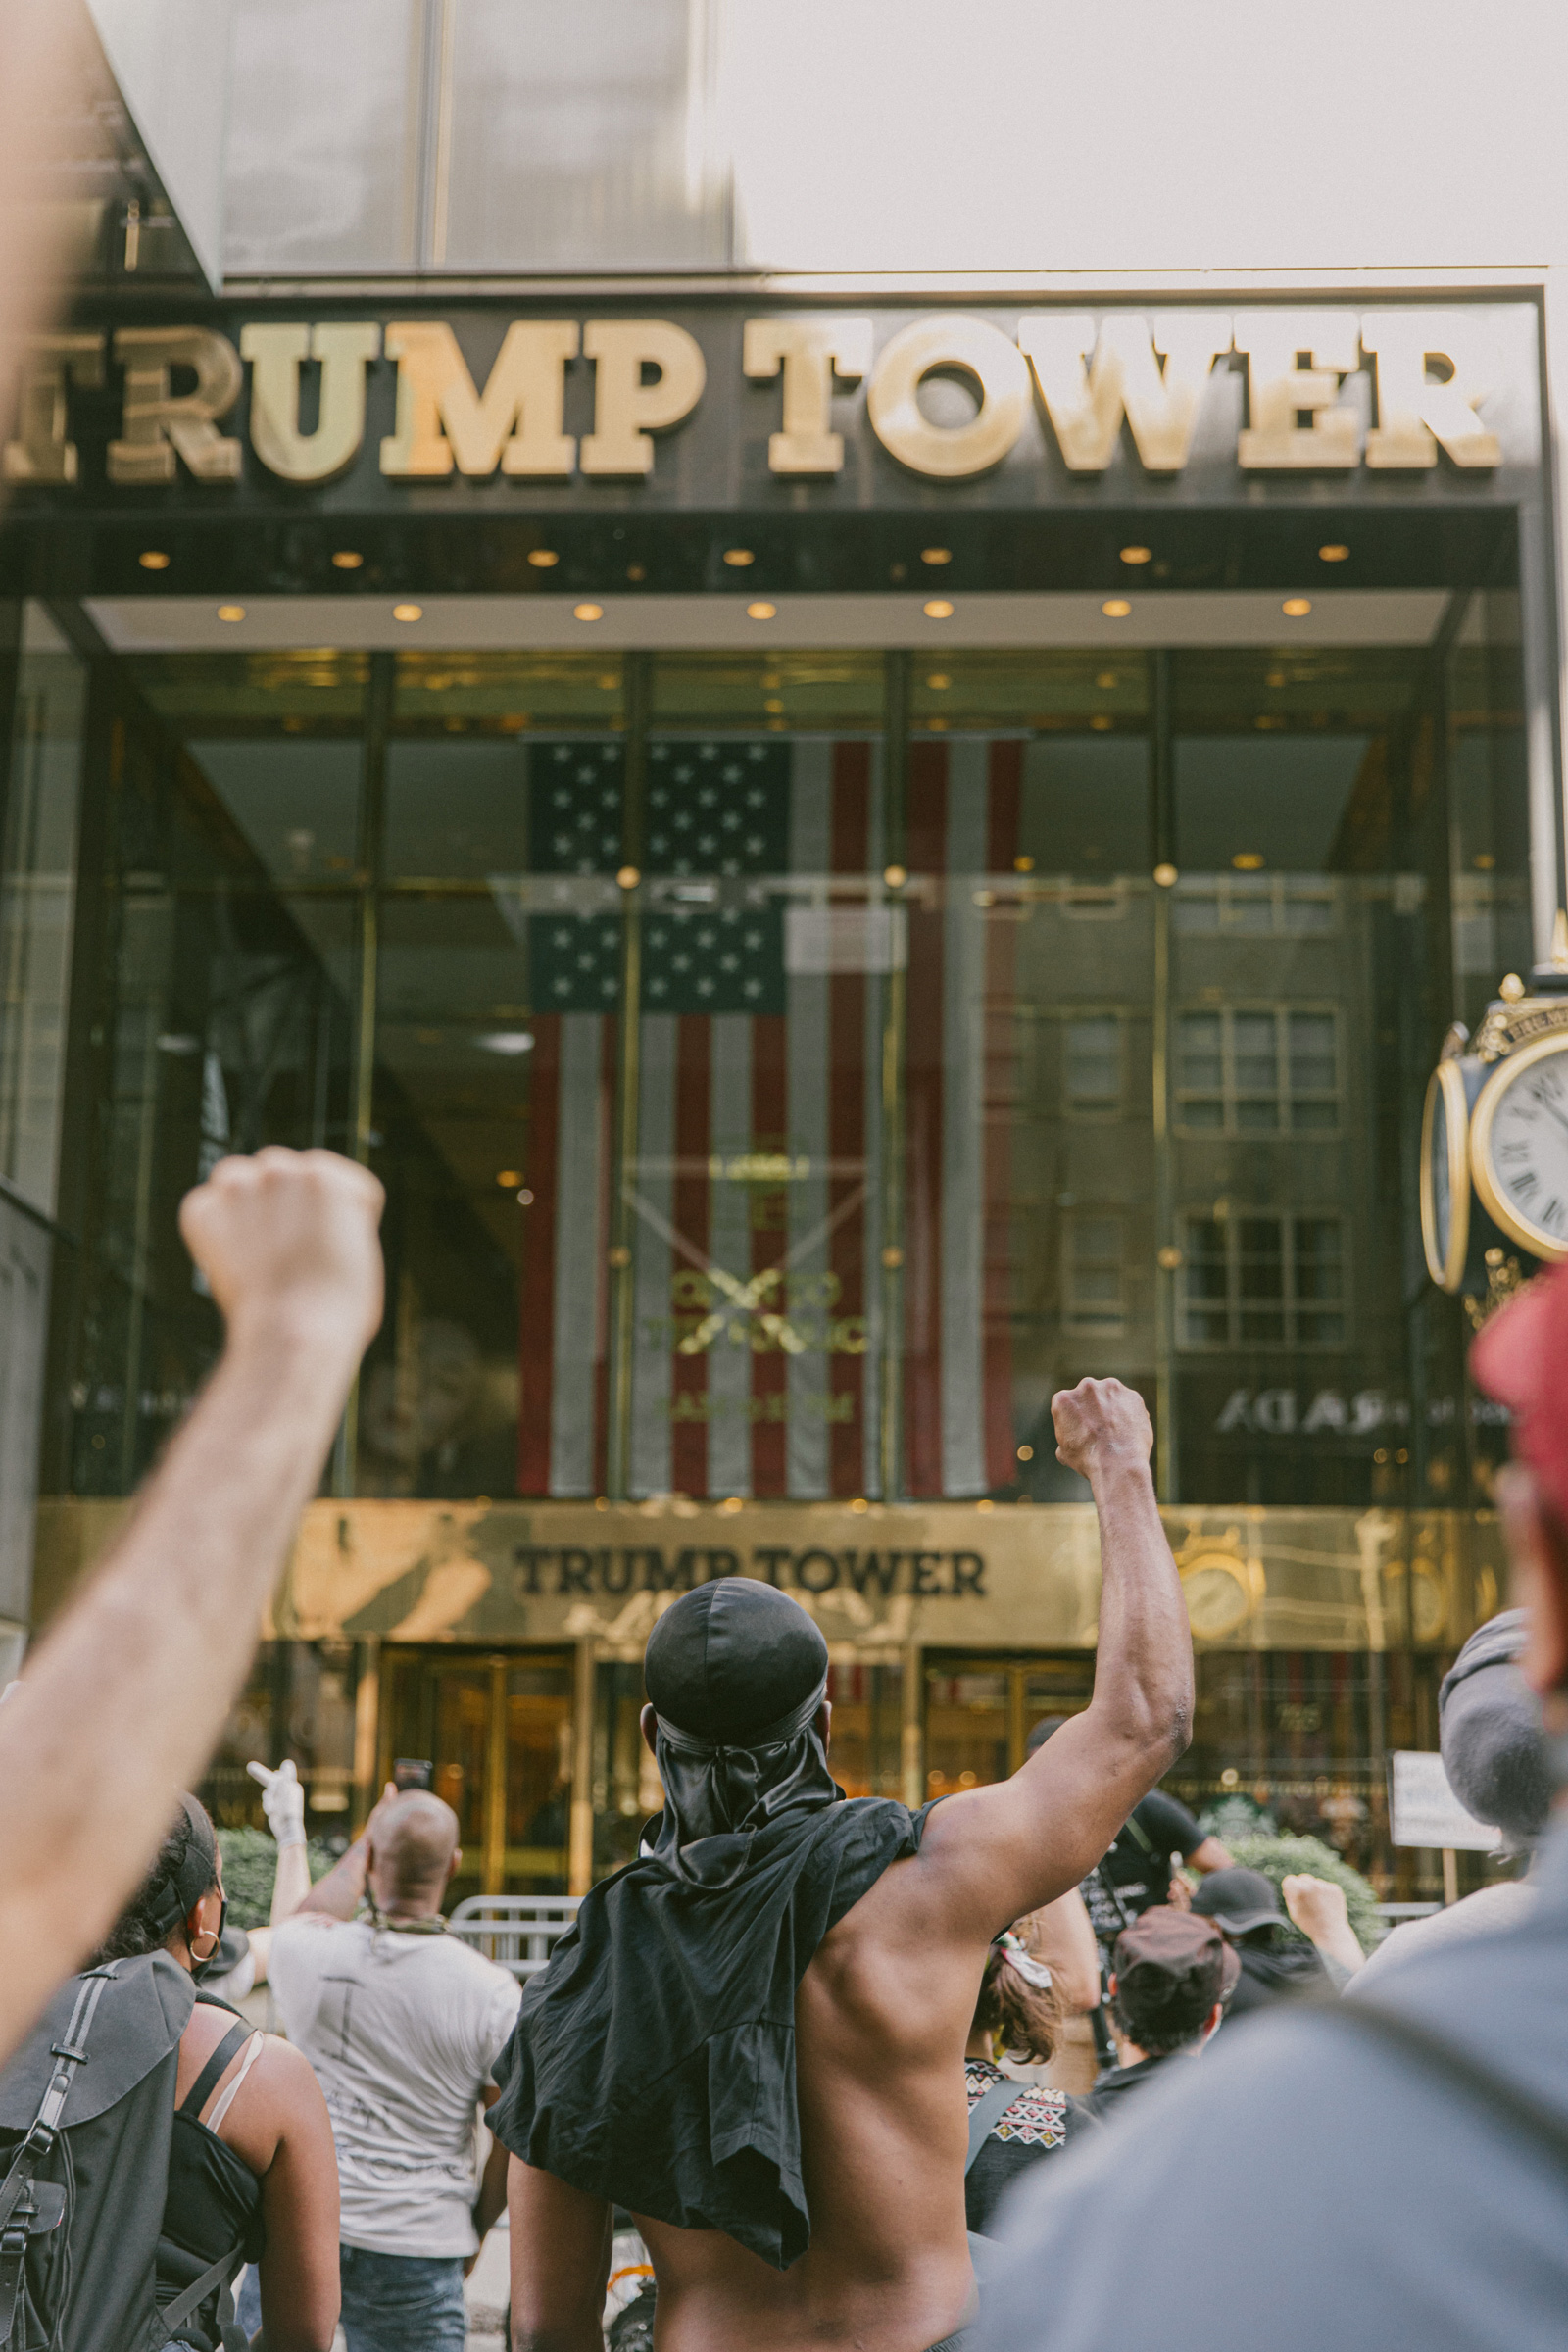 Protestors marching down 5th Avenue stop and stand before Trump Tower in New York City, May 30, 2020.